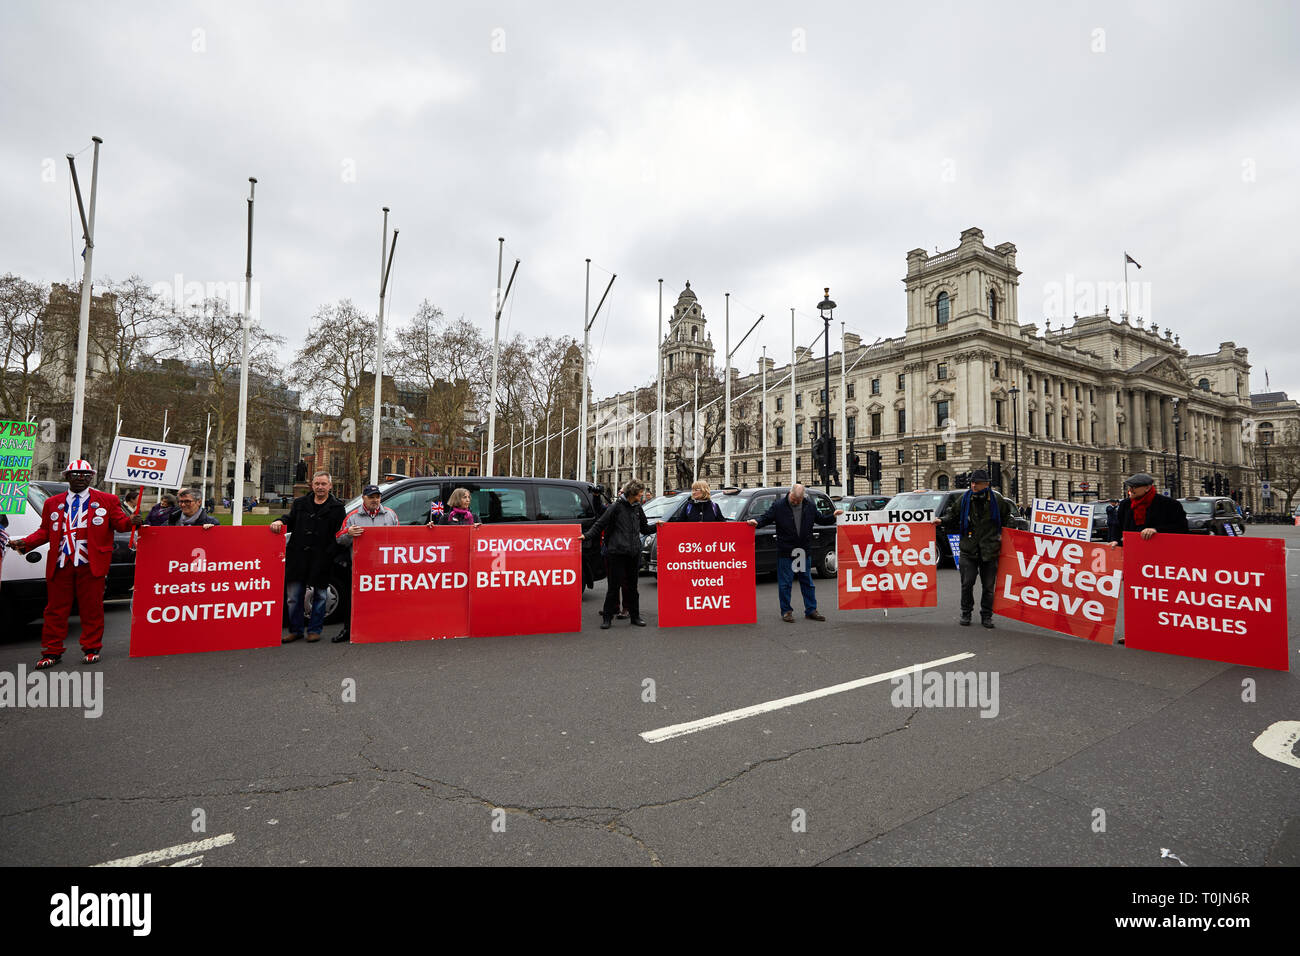 London, UK. - March 20, 2019: Leave supporters outside Parliament take advantage of a closure in the road to extend their campaigning. Credit: Kevin J. Frost/Alamy Live News Stock Photo